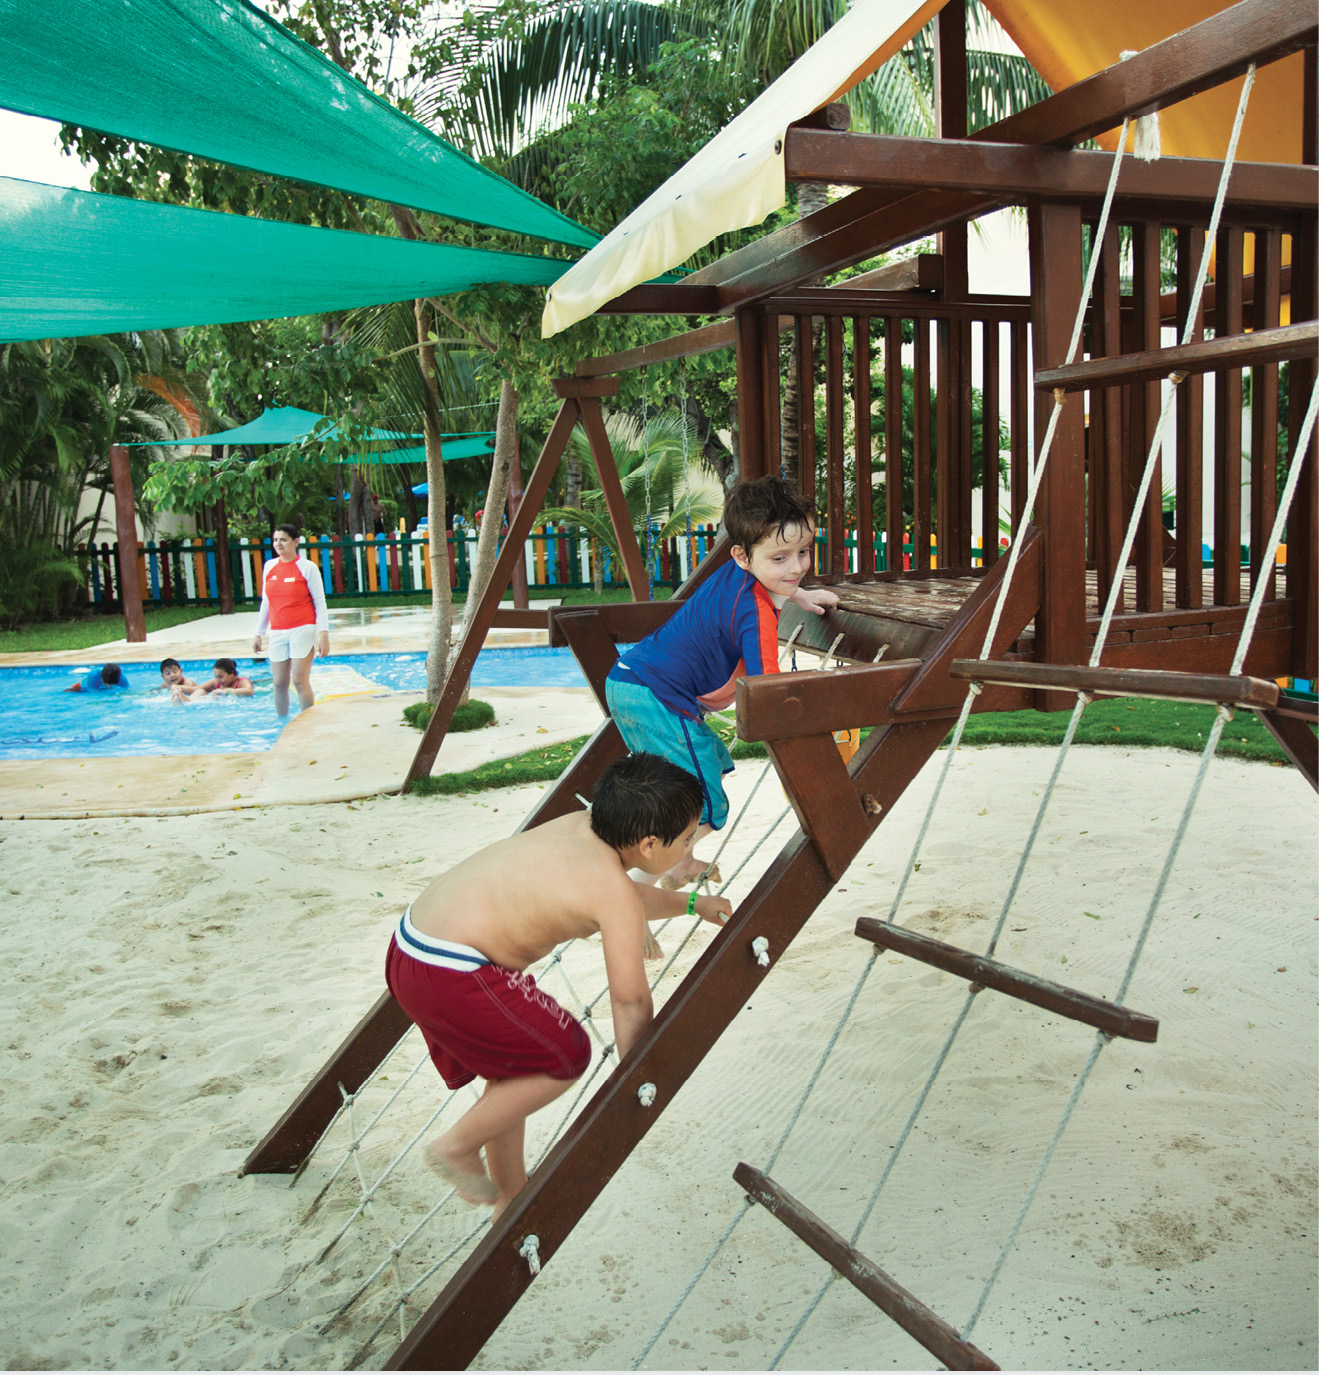 Caribbean/Mexico: Family Travel is Hot in the Caribbean & Mexico